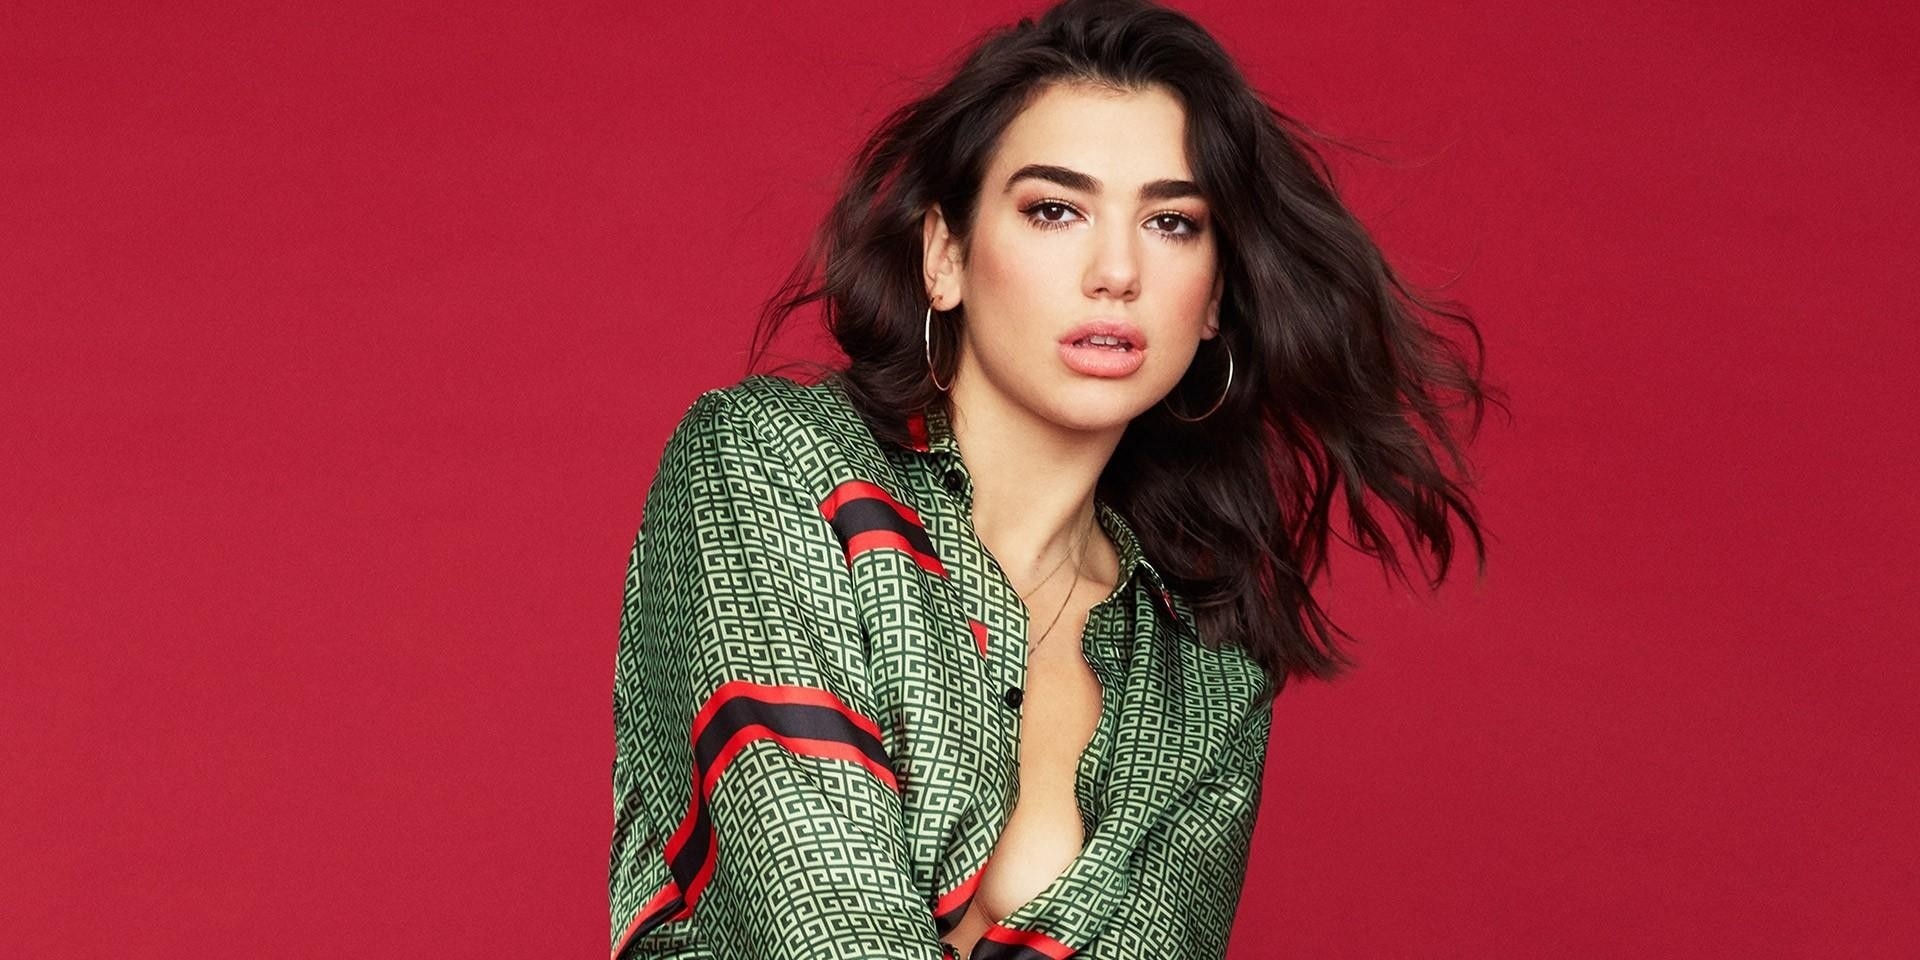 Dua Lipa releases long-awaited track 'Want To' for Jaguar campaign, announces collab with BLACKPINK